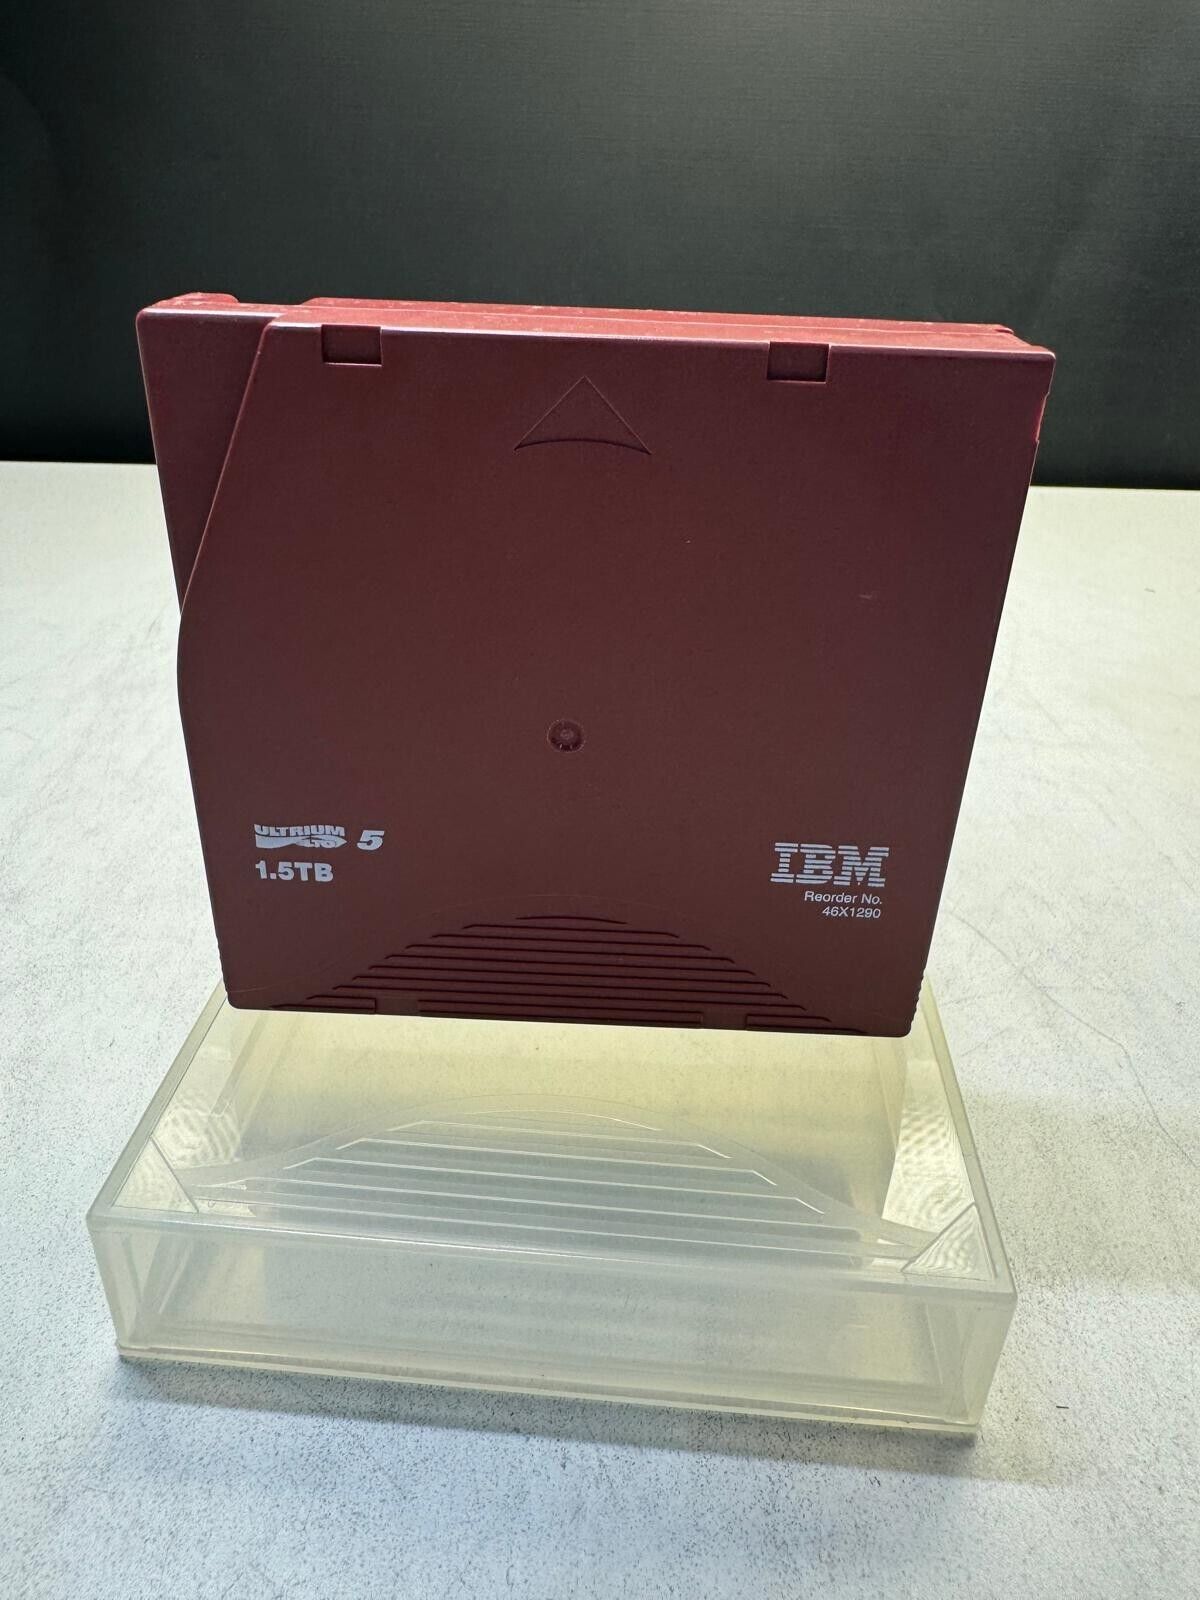 LOT of 10 IBM Ultrium 5 Data Cartridge 1.5/3TB LTO 5 Backup Tapes with case